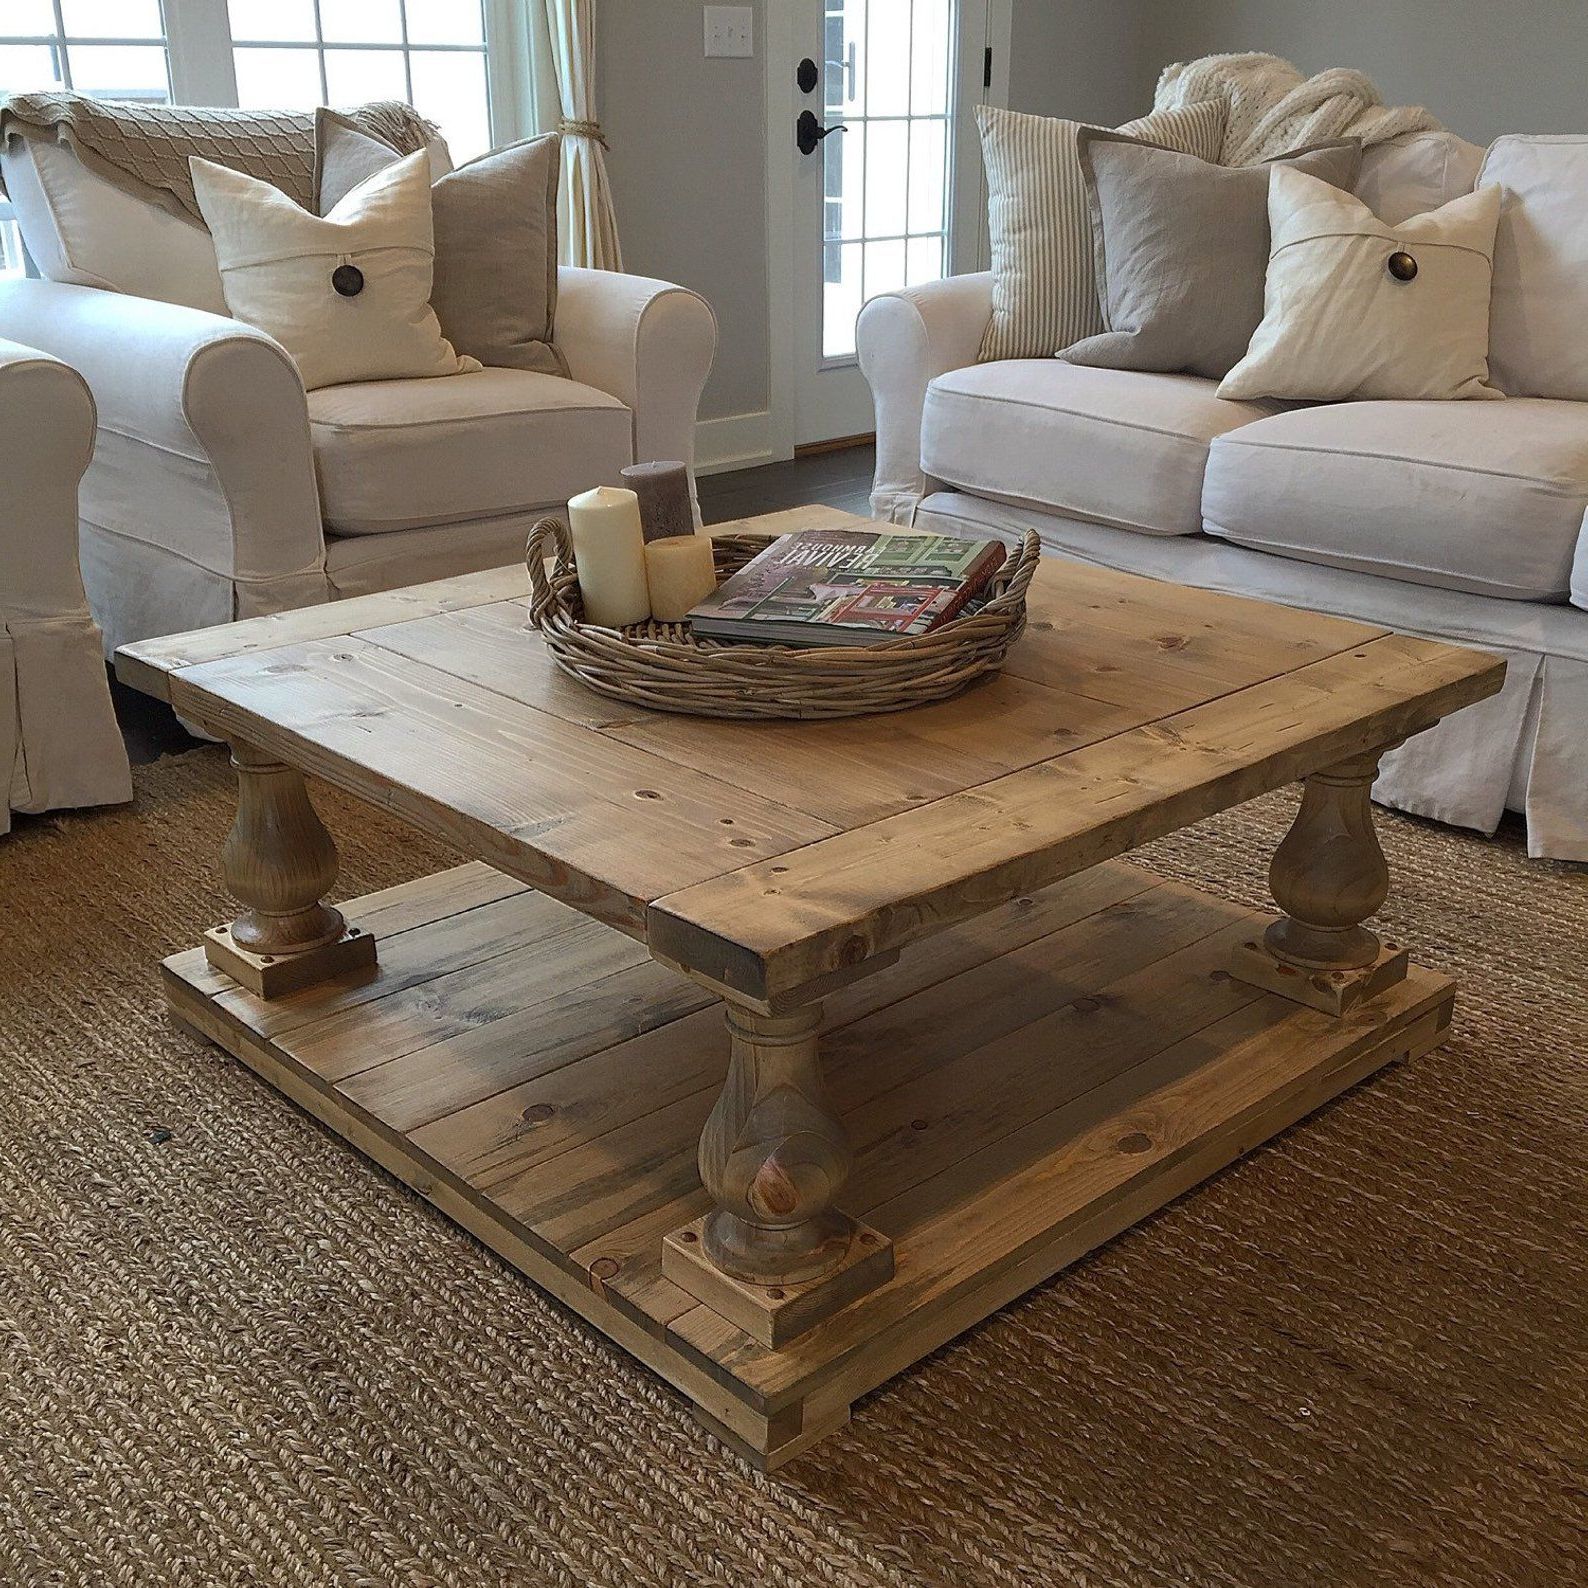 5 Reasons To Invest In A Rustic Farmhouse Coffee Table – Coffee Table Decor Pertaining To Living Room Farmhouse Coffee Tables (Gallery 12 of 20)